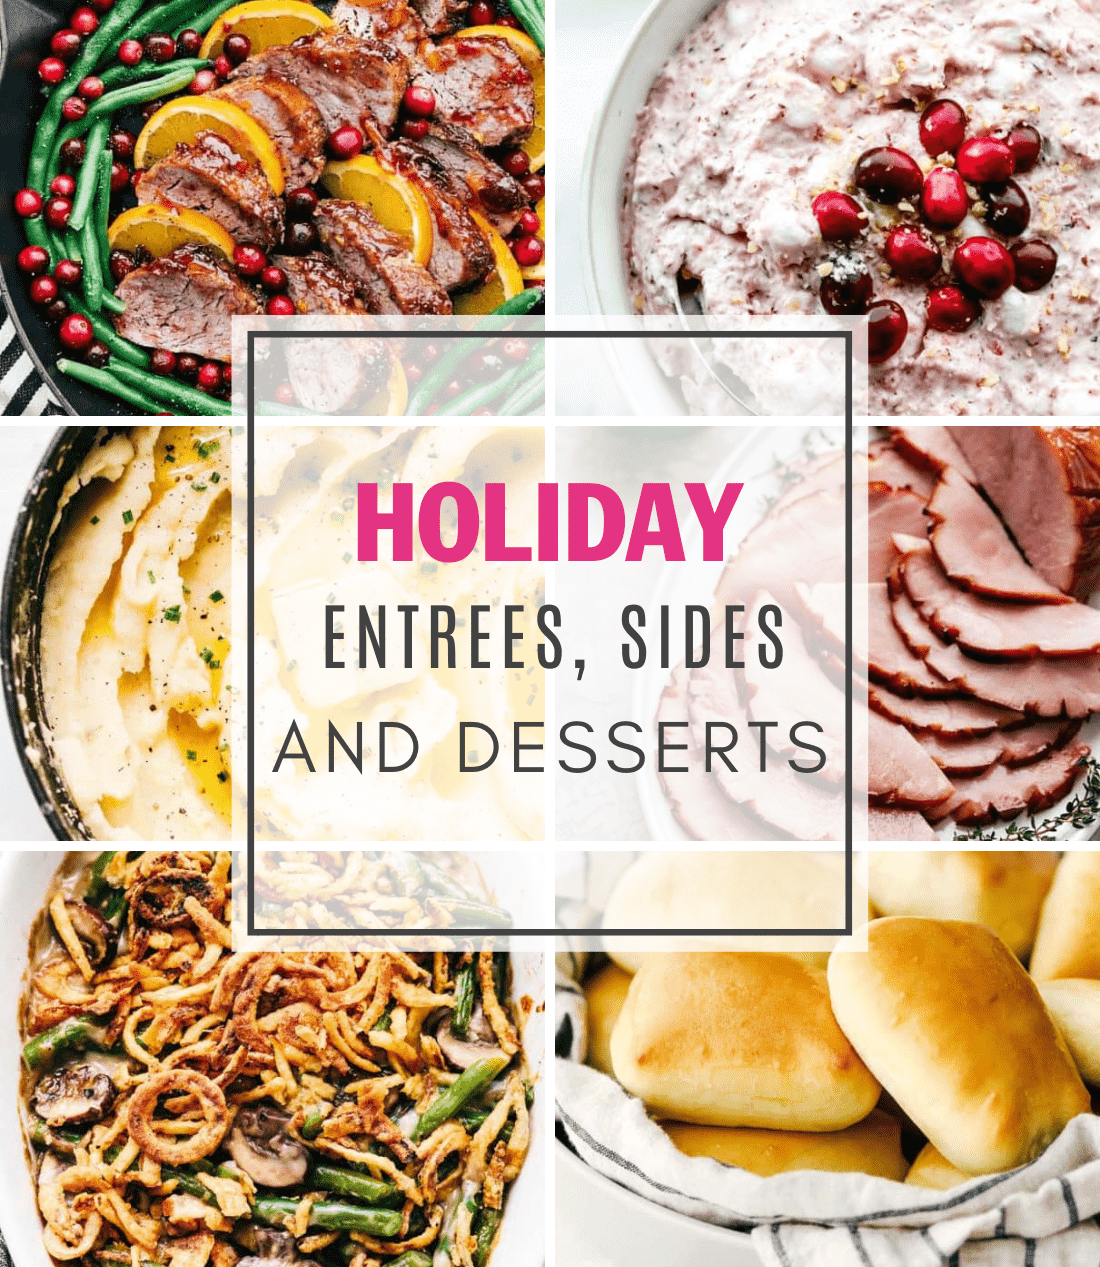 Holiday Entrees, Sides and Desserts